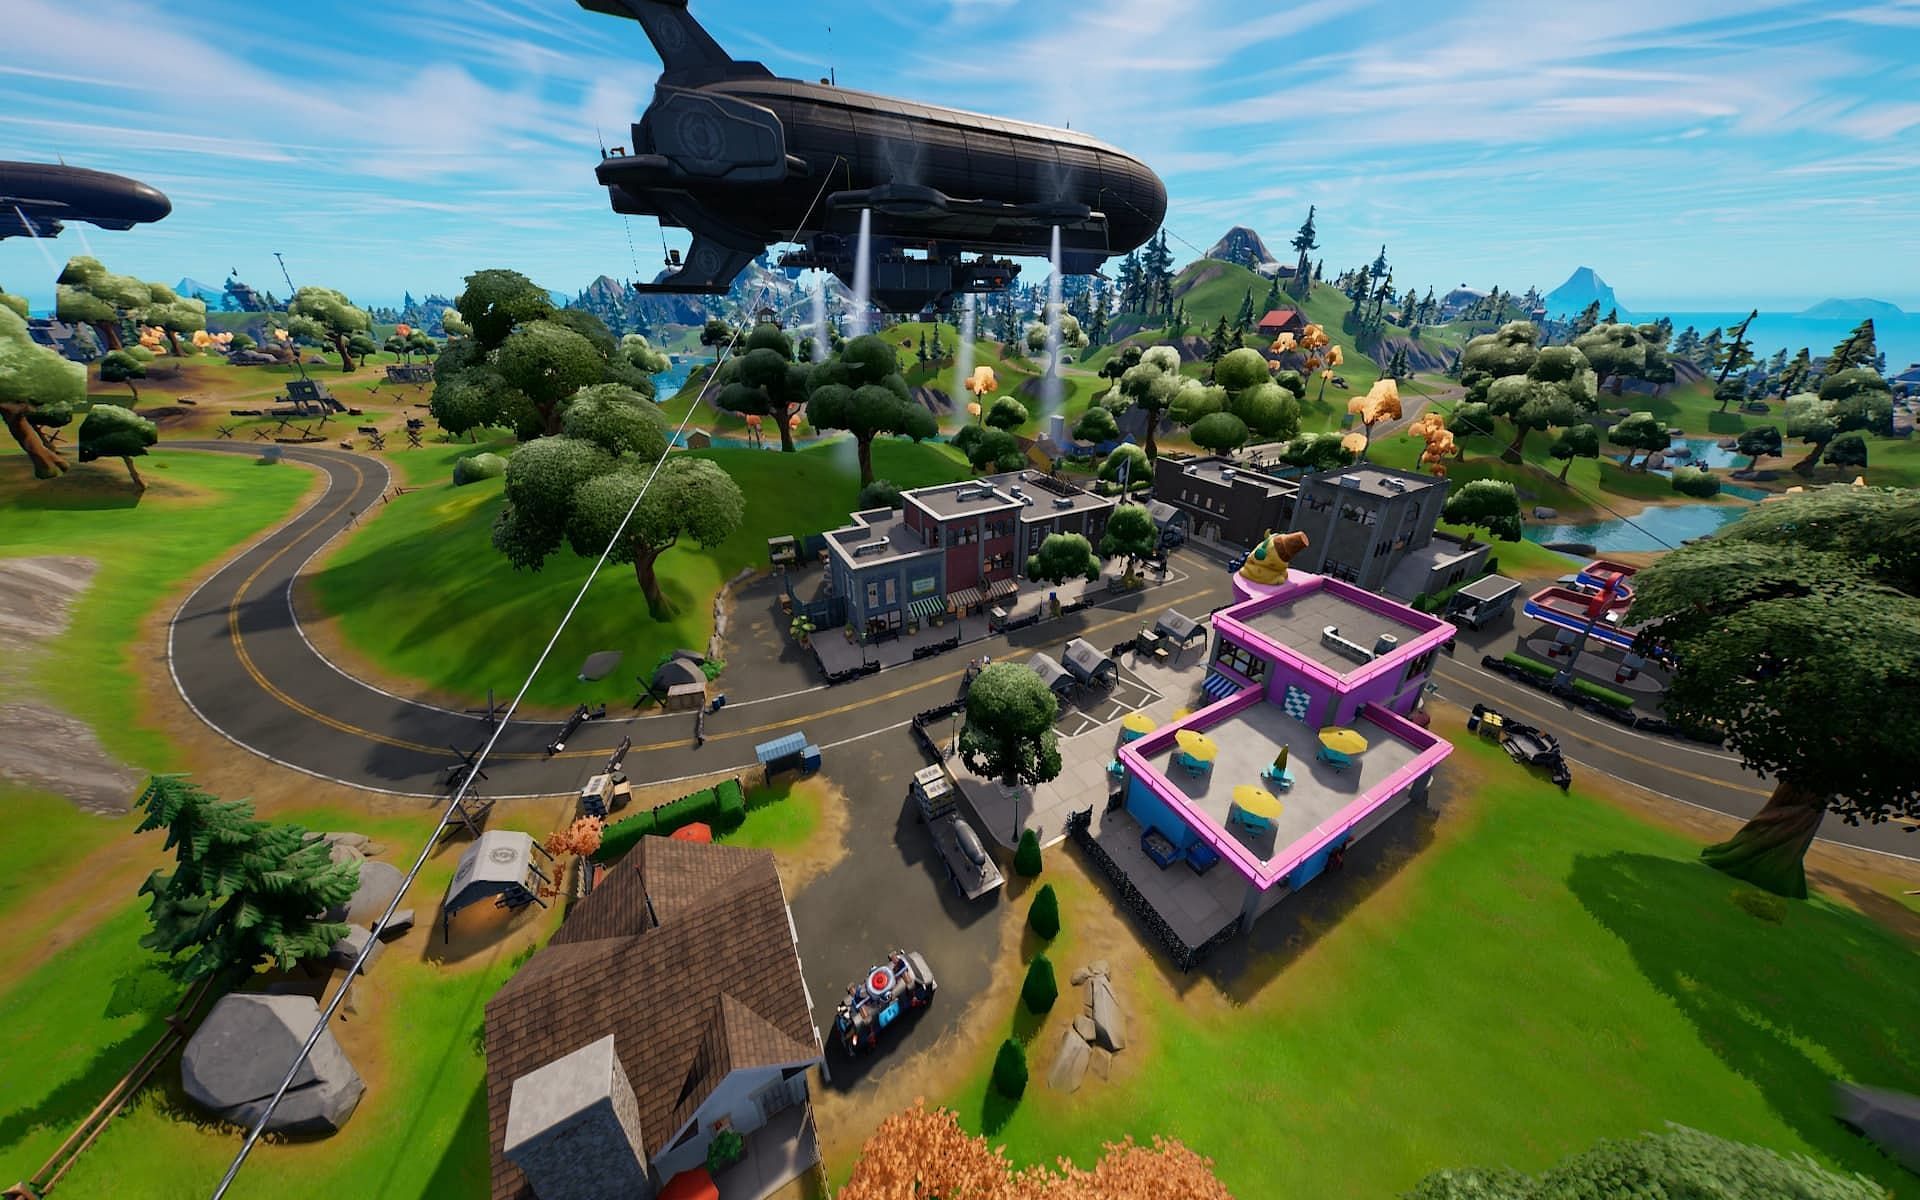 Coney Crossroads is the latest POI to see the battle between the IO and the Seven in Fortnite (Image via Epic Games)